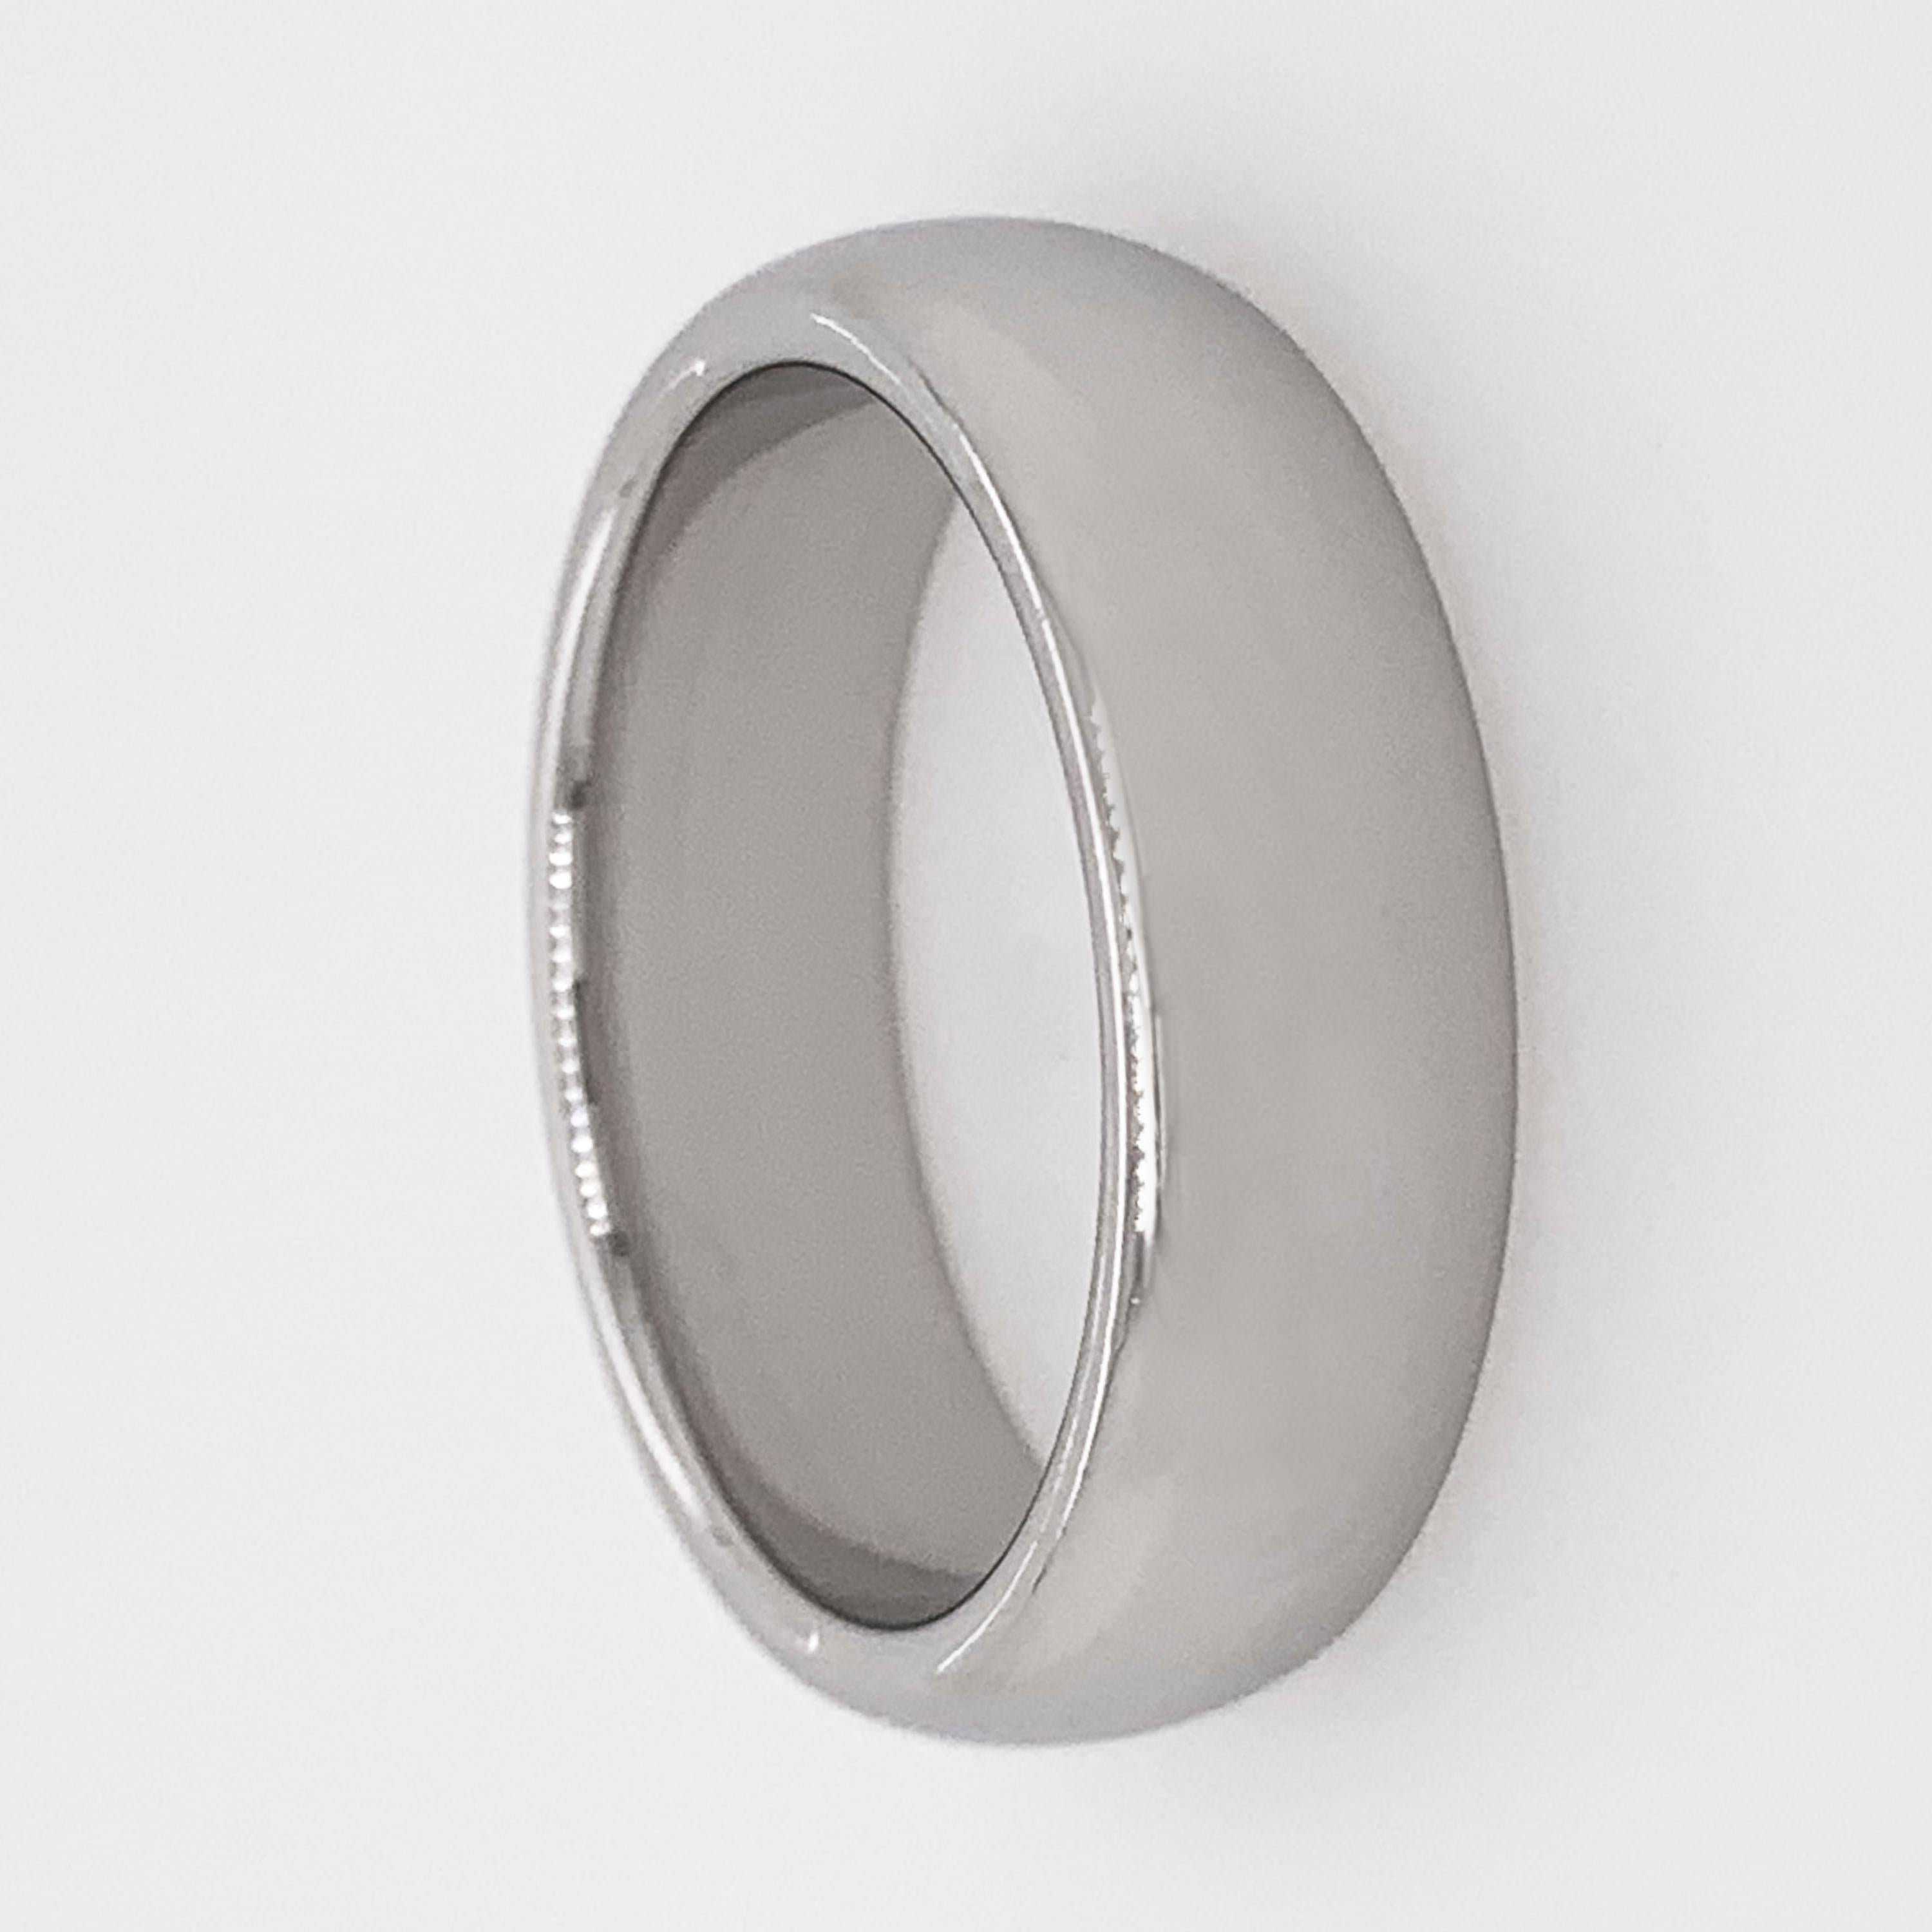 This simple but elegant Tiffany & Co. curved platinum band is the perfect choice for a man who wants a designer wedding ring without seeming too flashy.  

6mm wide.
Size 7.5 (55 EU)
14.45 grams.
Signed Tiffany&Co. 
